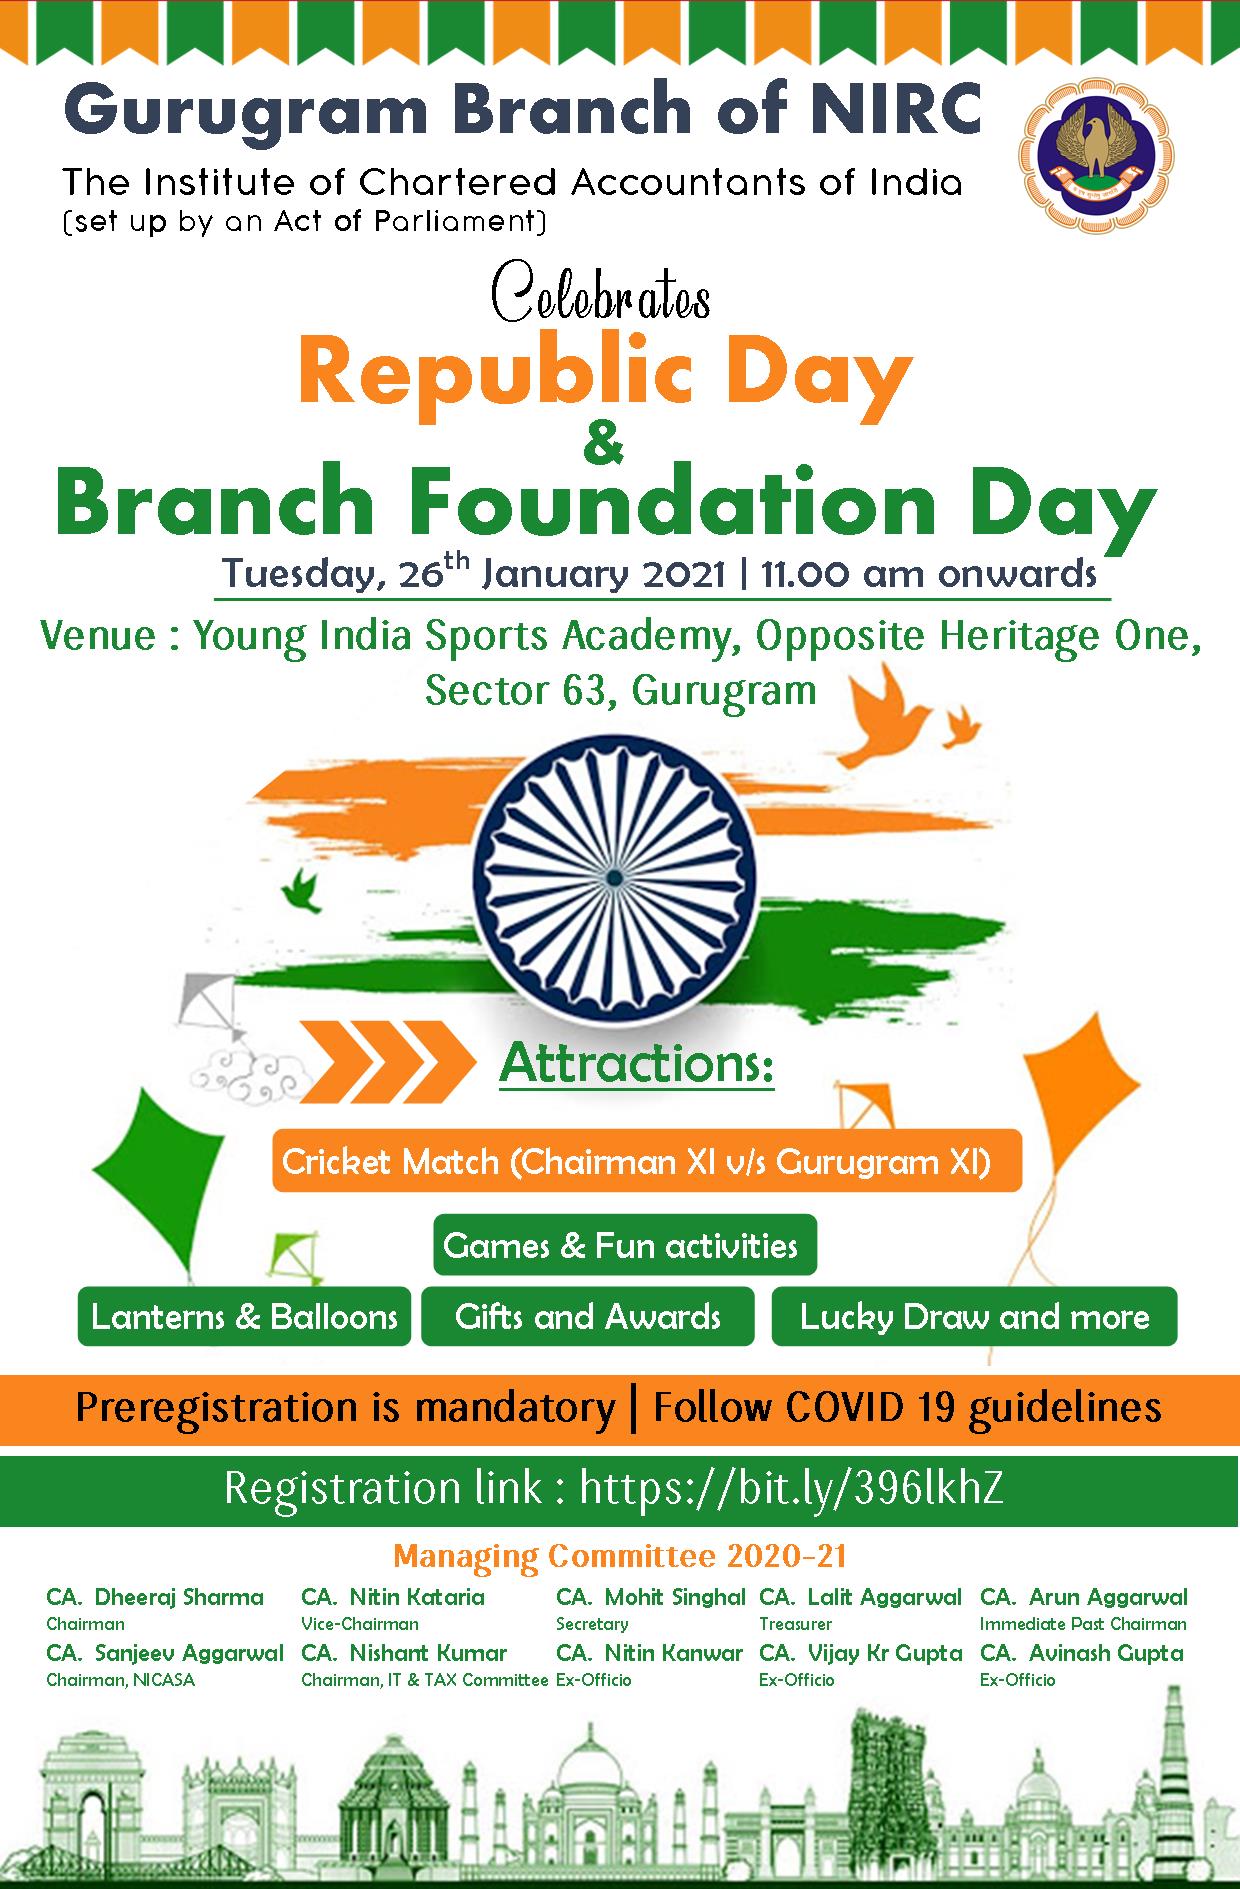 Celebration of Republic Day and Branch Foundation Day